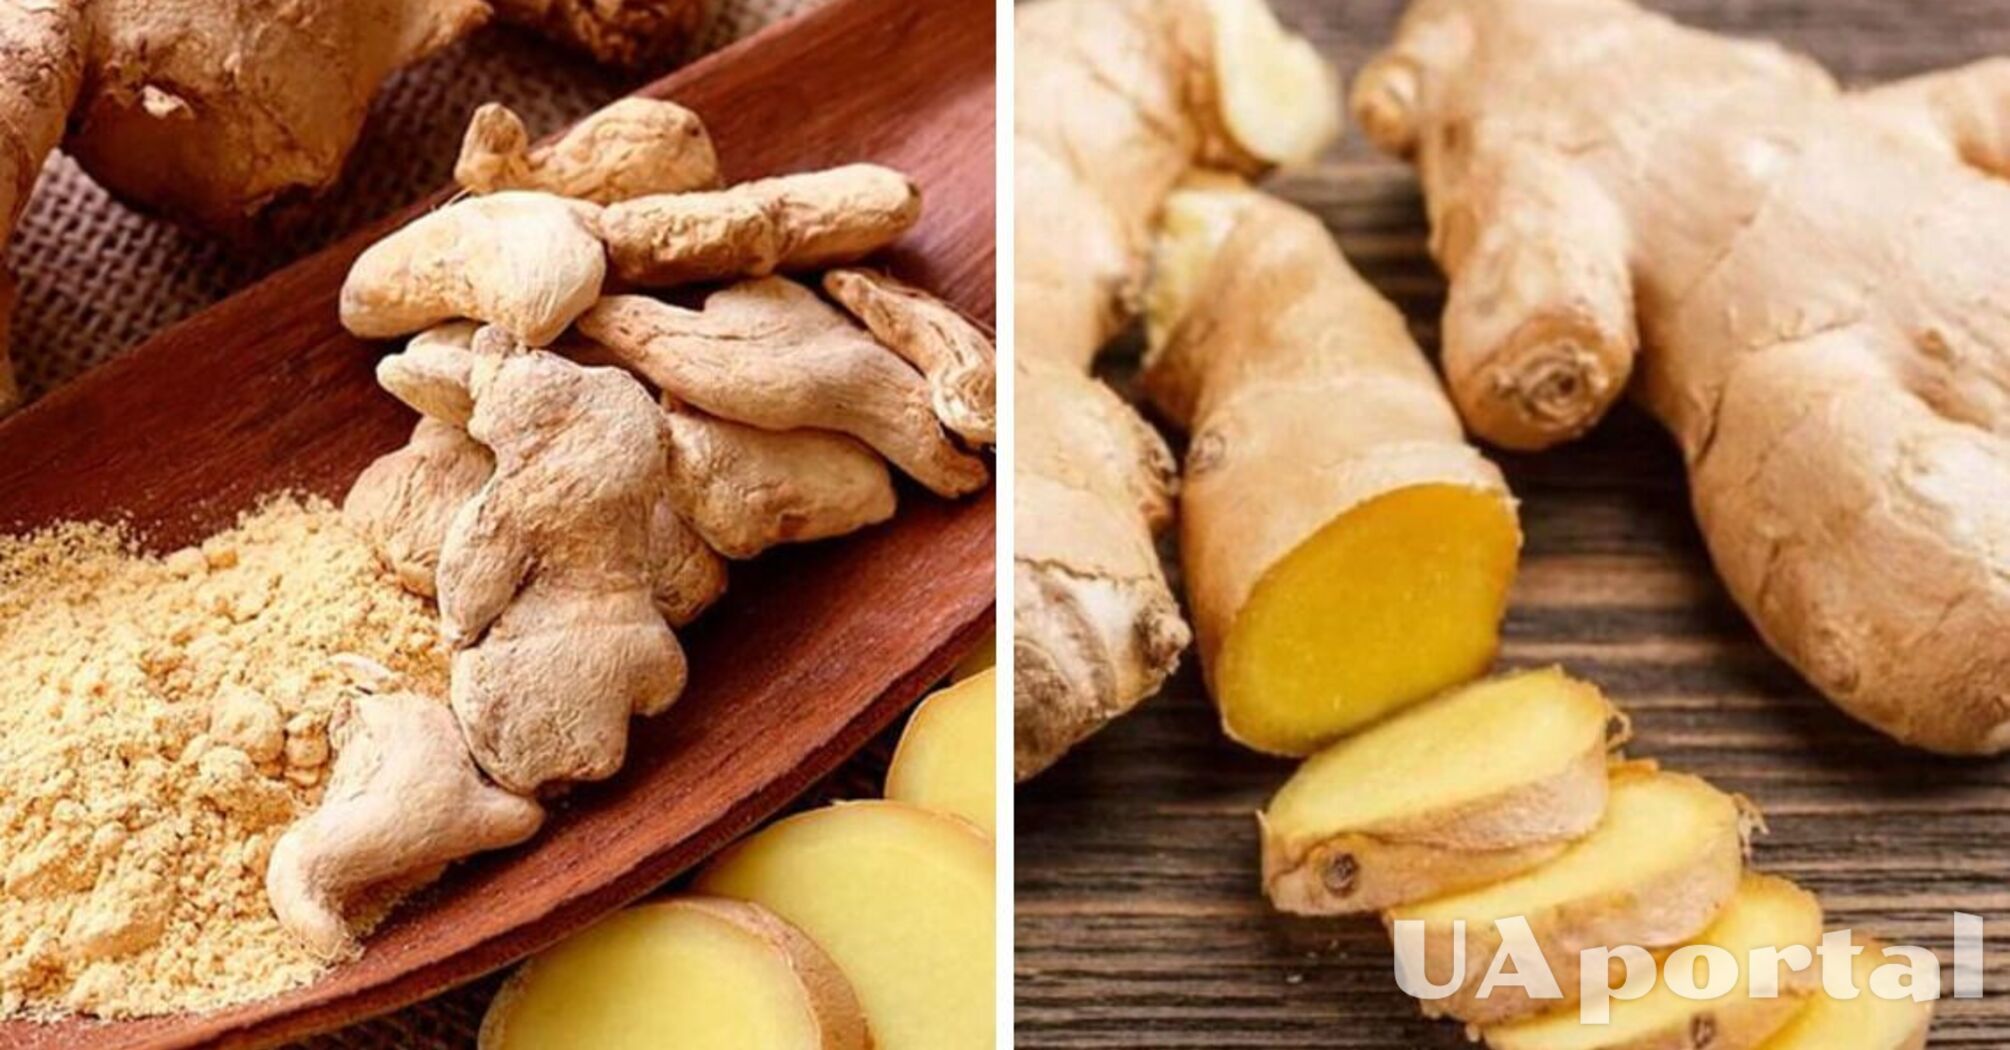 Can I eat ginger every day?